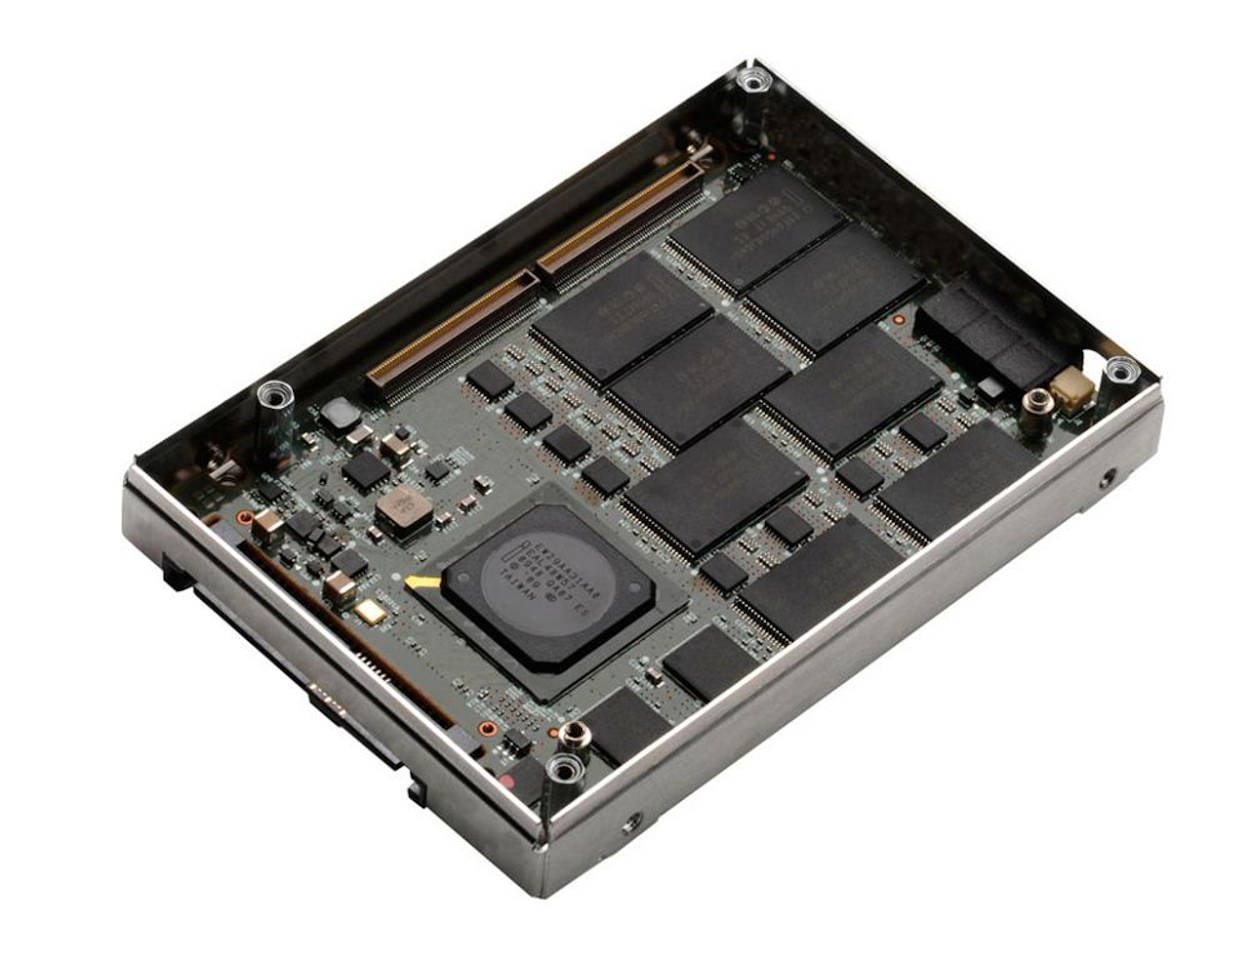 POS Controllers - DRIVE ONLY - 128GB SSD - Hard Drive Bracket w/ SanDisk X110 Solid State Drive